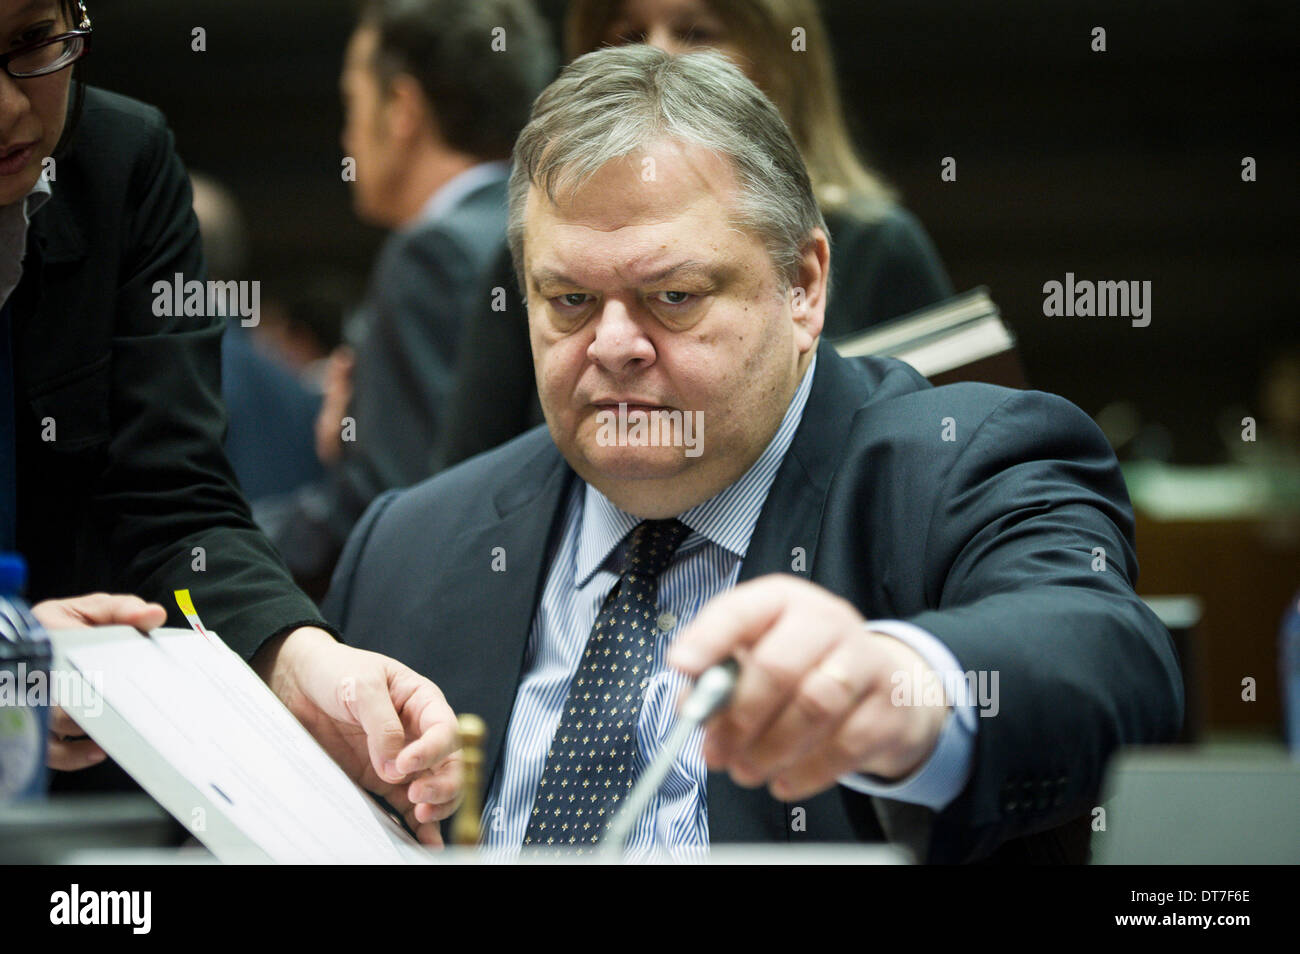 Greek Foreign Minister Evangelos Venizelos during General Affair Council European Affairs ministers meeting at European Council headquarters in Brussels, Belgium on 11.02.2014 Ministers take a decision on the authorisation of the placing of the market for cultivation purposes of the genetically modified maize 1507. The Council established also an EU military operation to contribute to a secure environment in the Central African Republic, as authorised by the UN Security Council in resolution 2134. by Wiktor Dabkowski Stock Photo